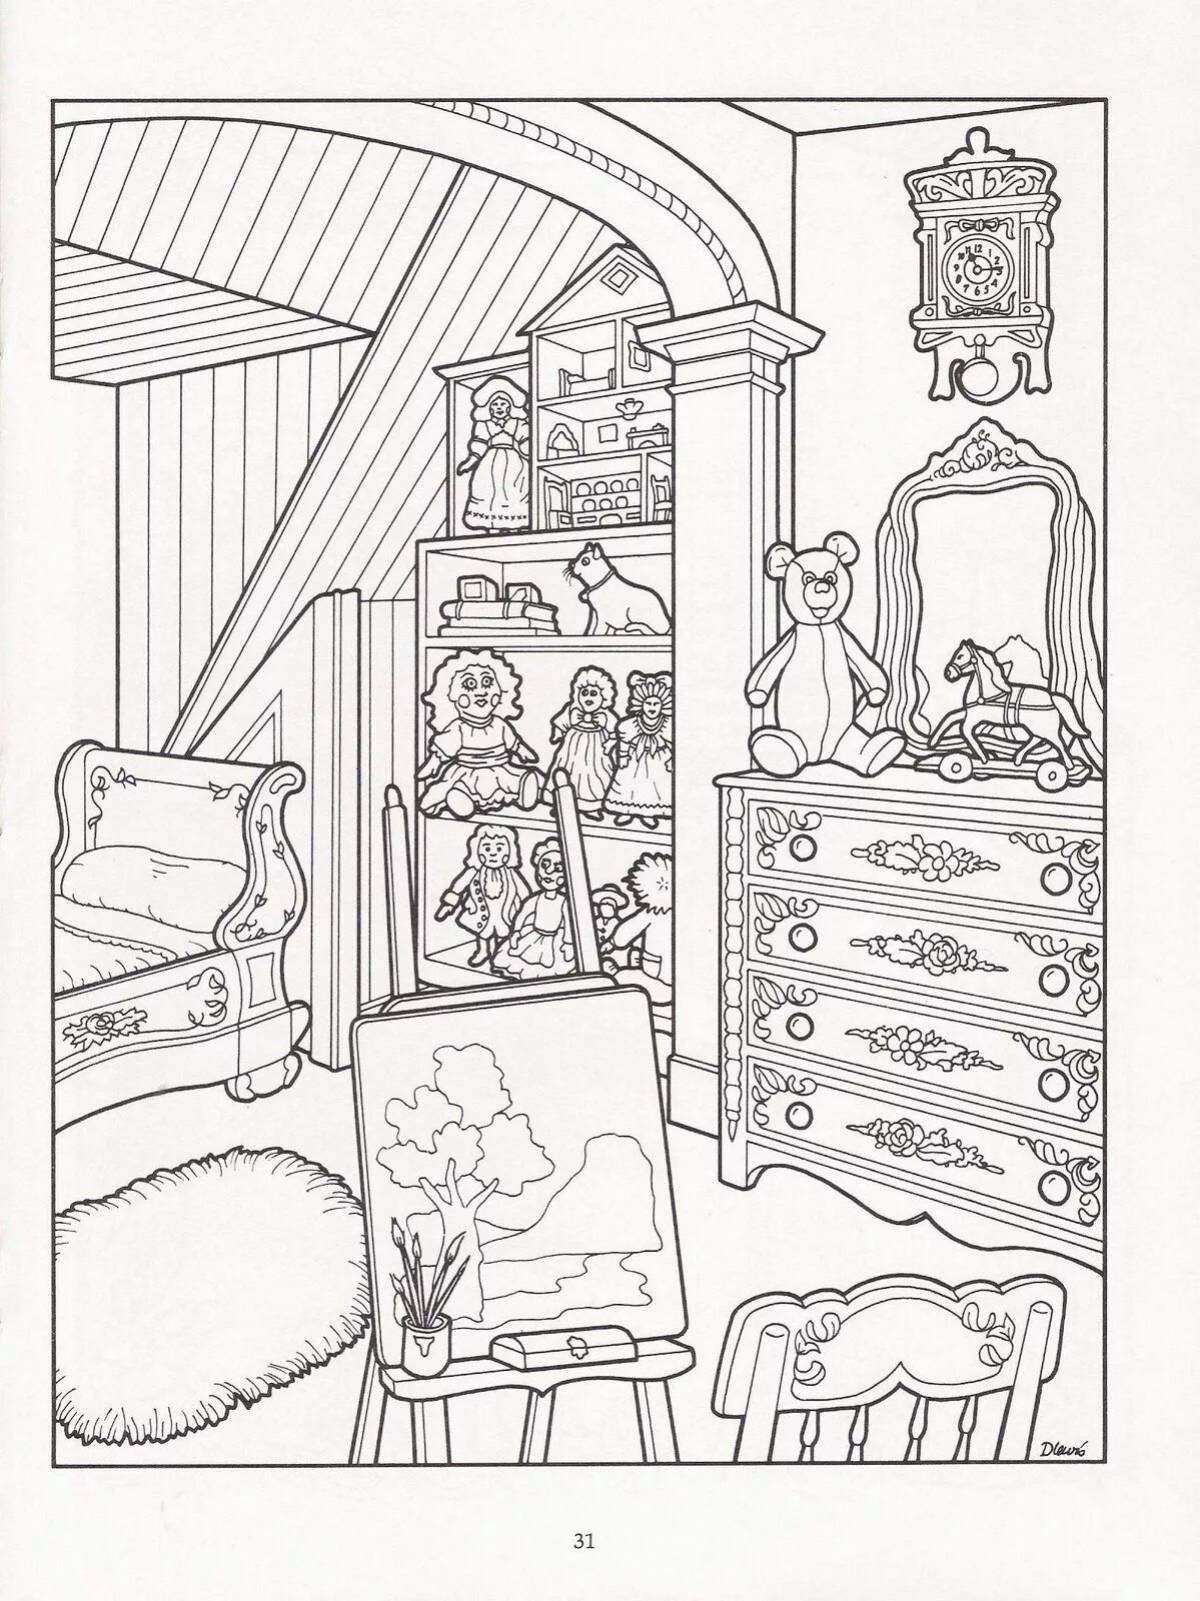 Living doll house coloring book